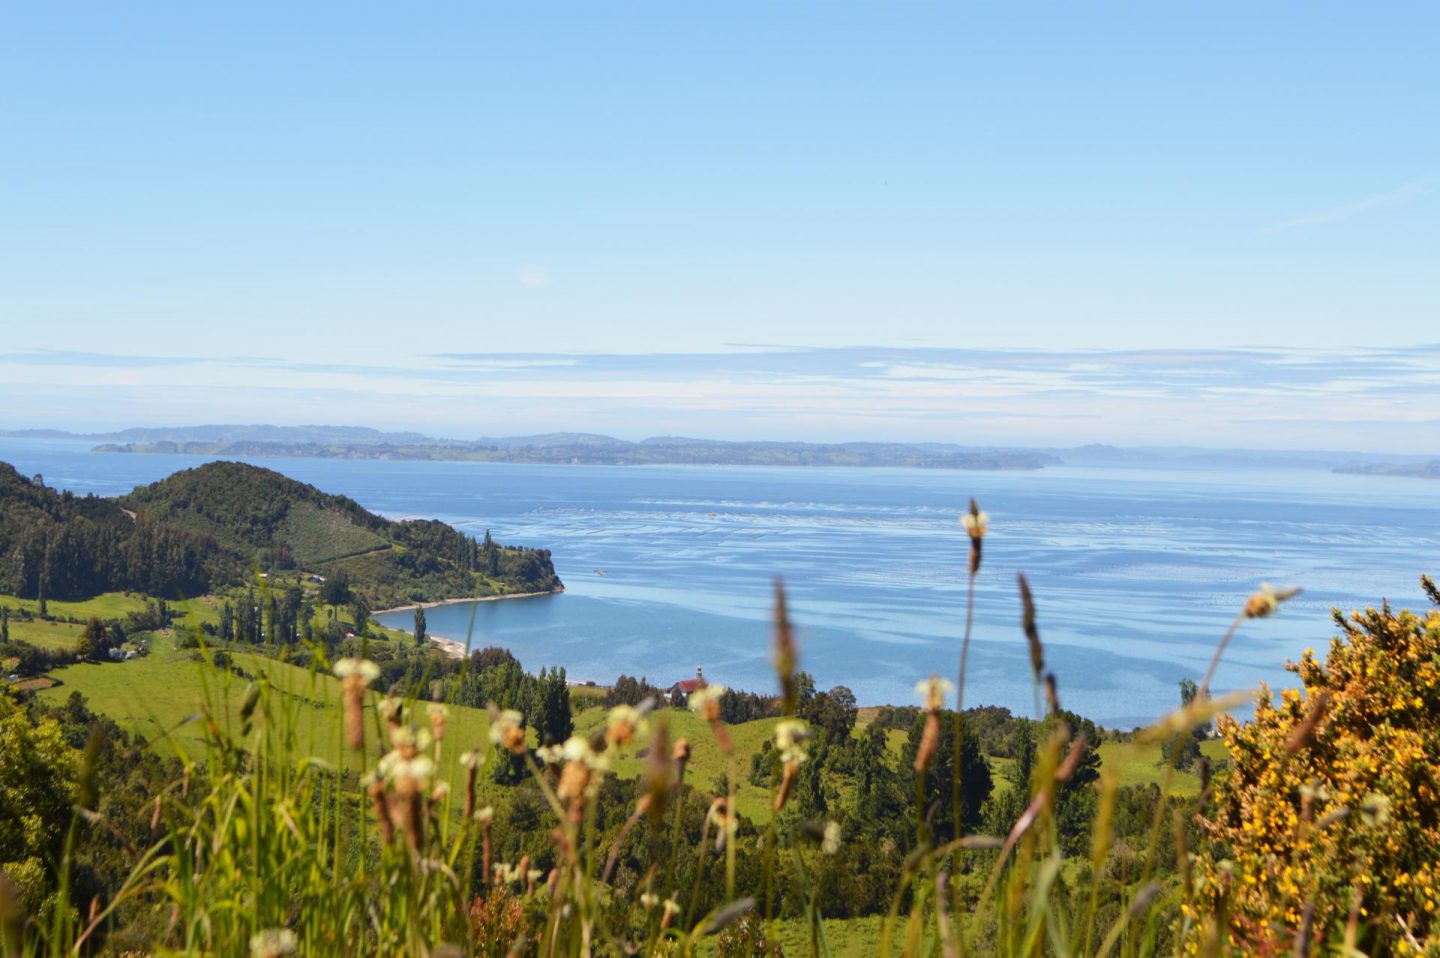 Travellers’ guide to Chiloé, Chile